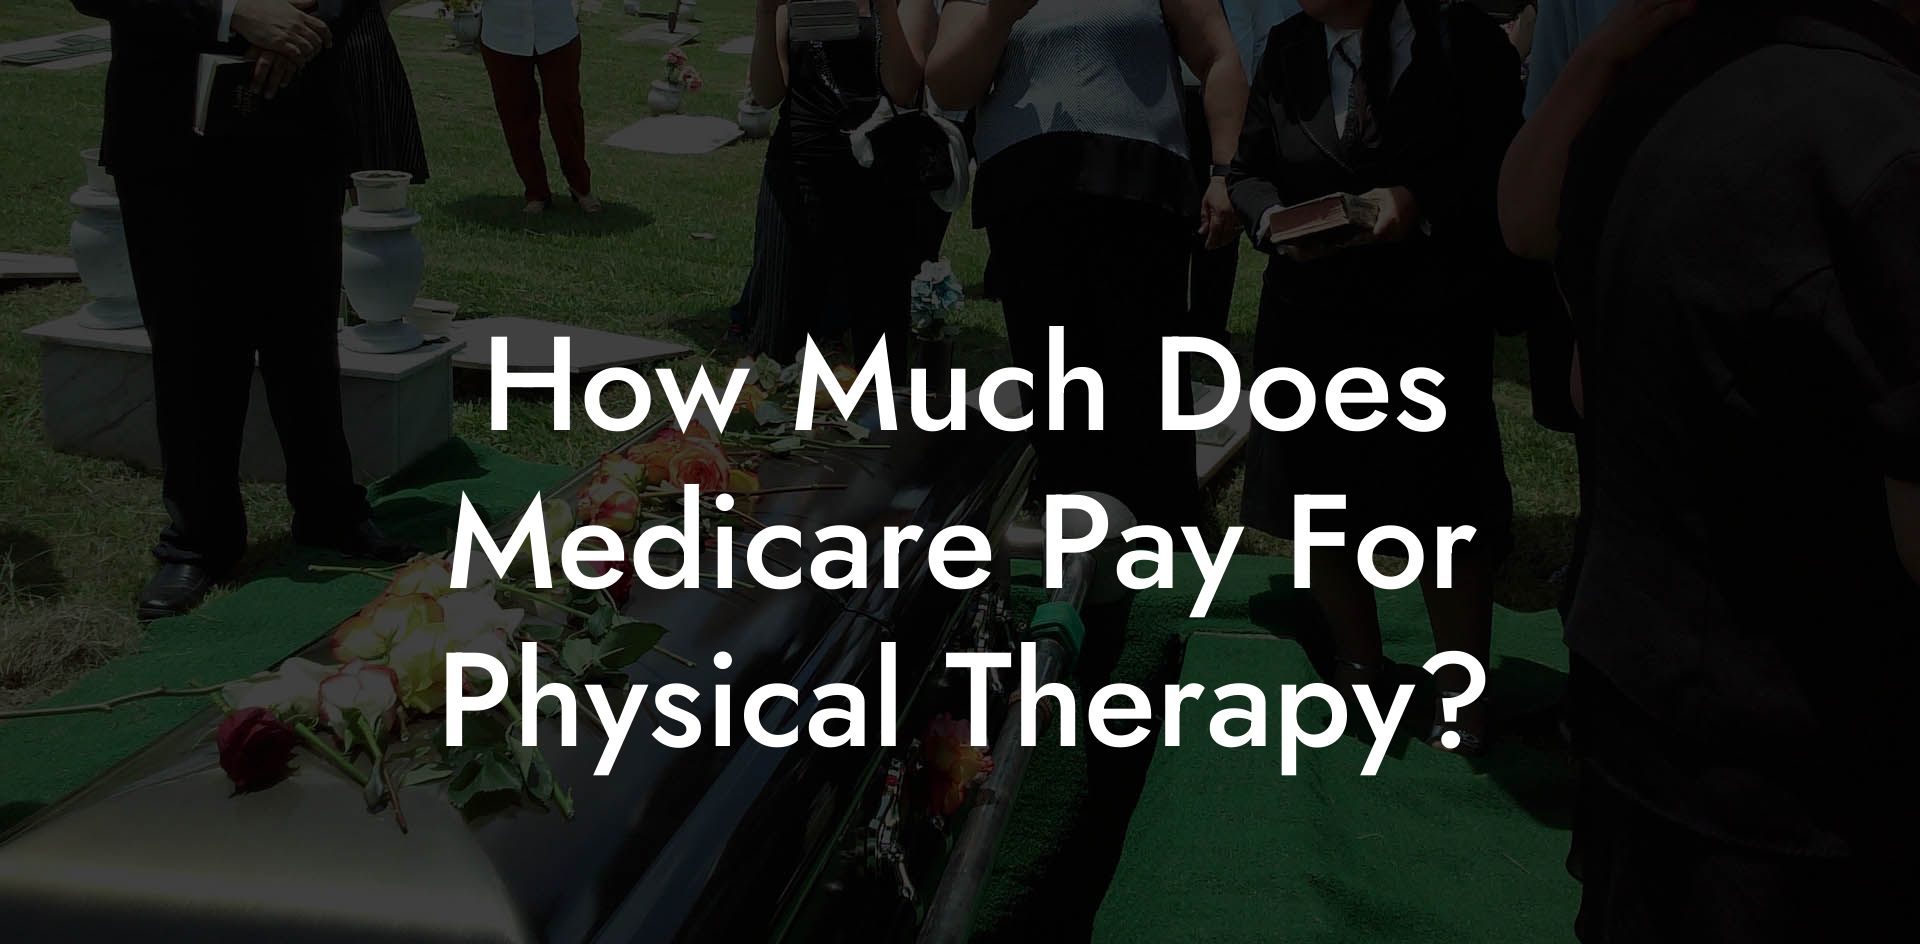 How Much Does Medicare Pay For Physical Therapy?